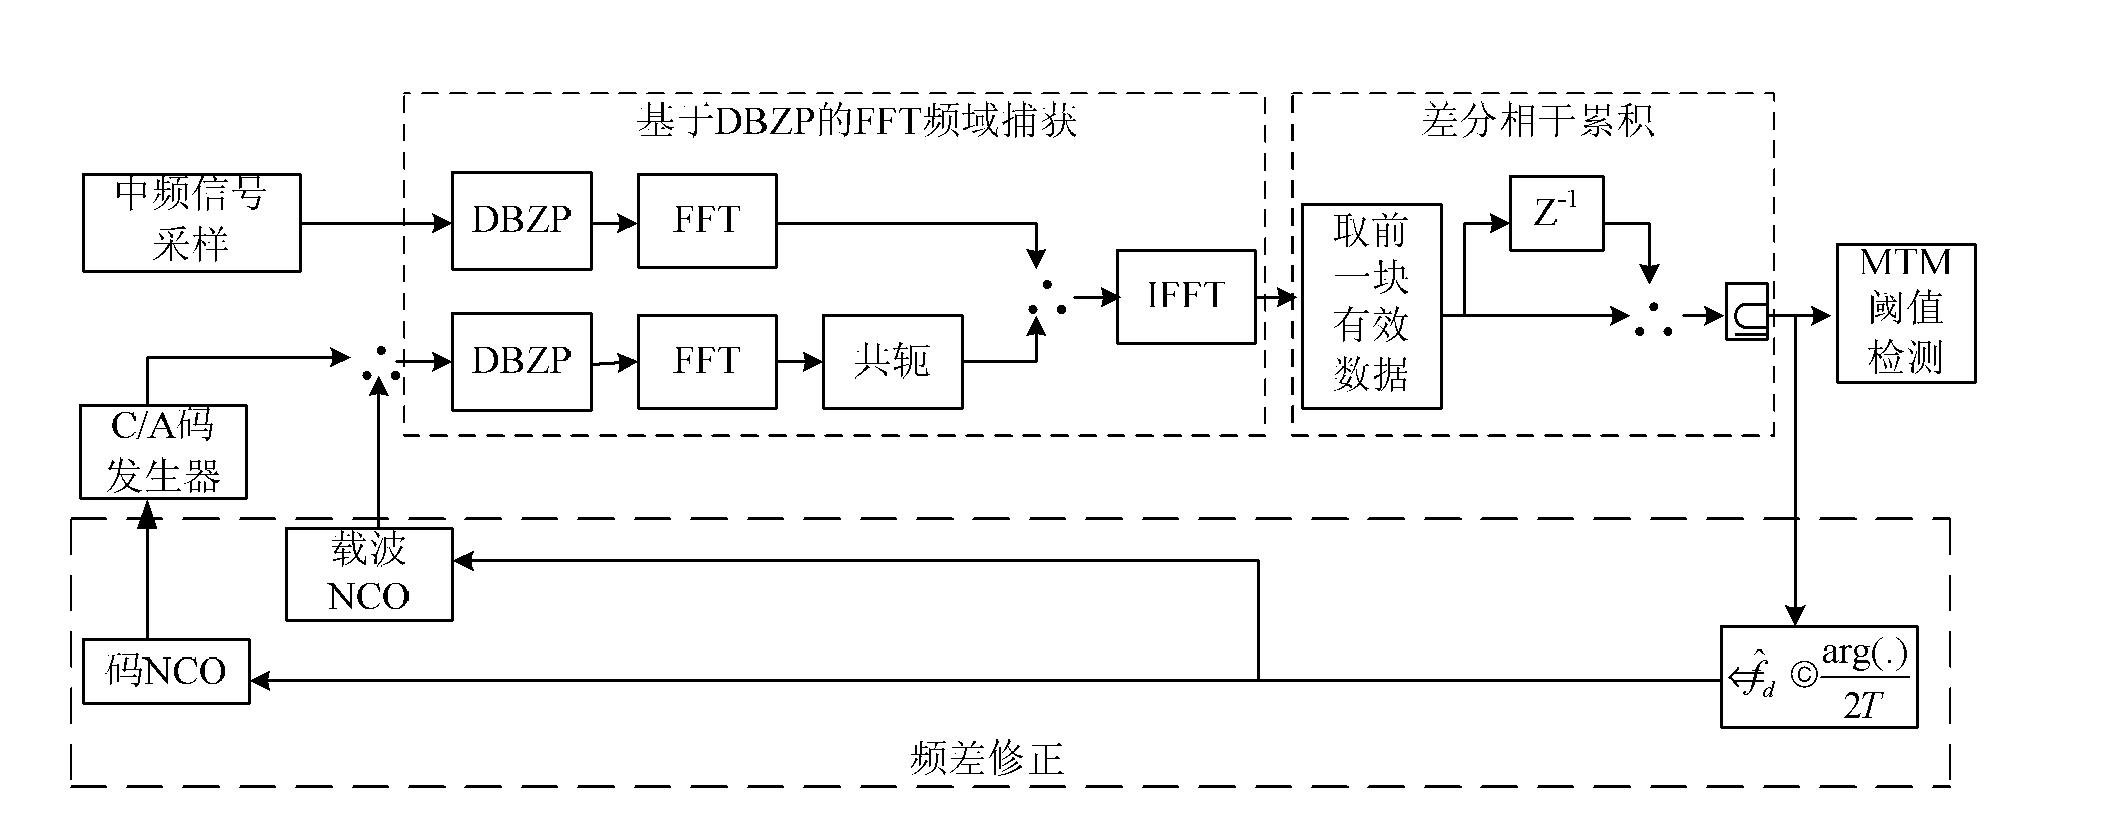 Method and system for global position system (GPS) signal capture